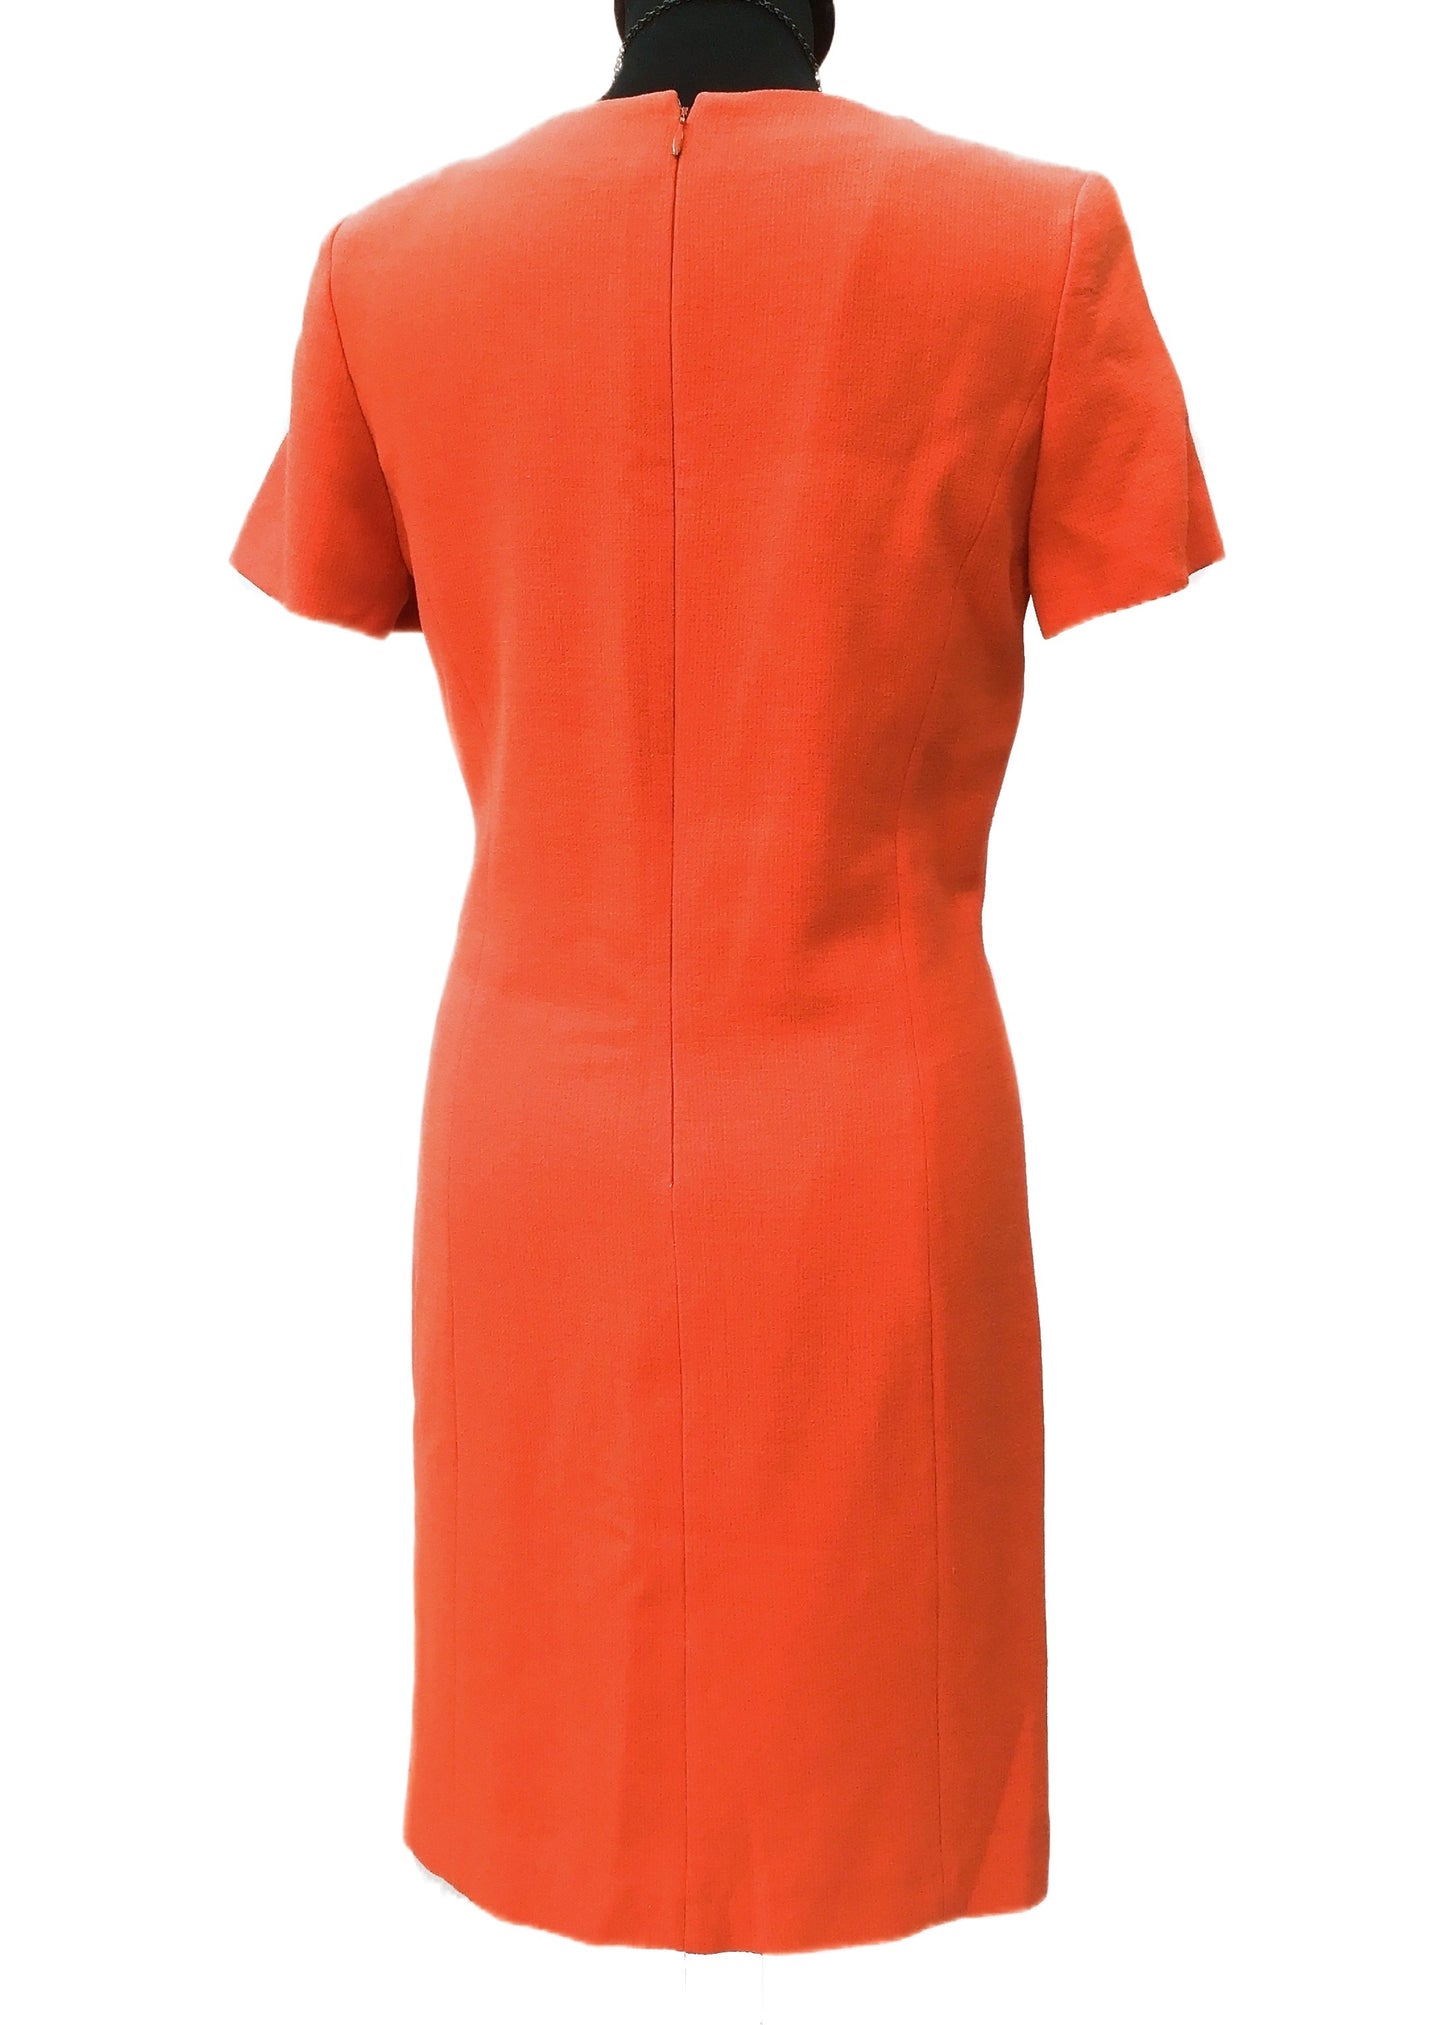 1990s Orange Short Sleeve Wiggle Shift Dress by George Rech for Synonyme